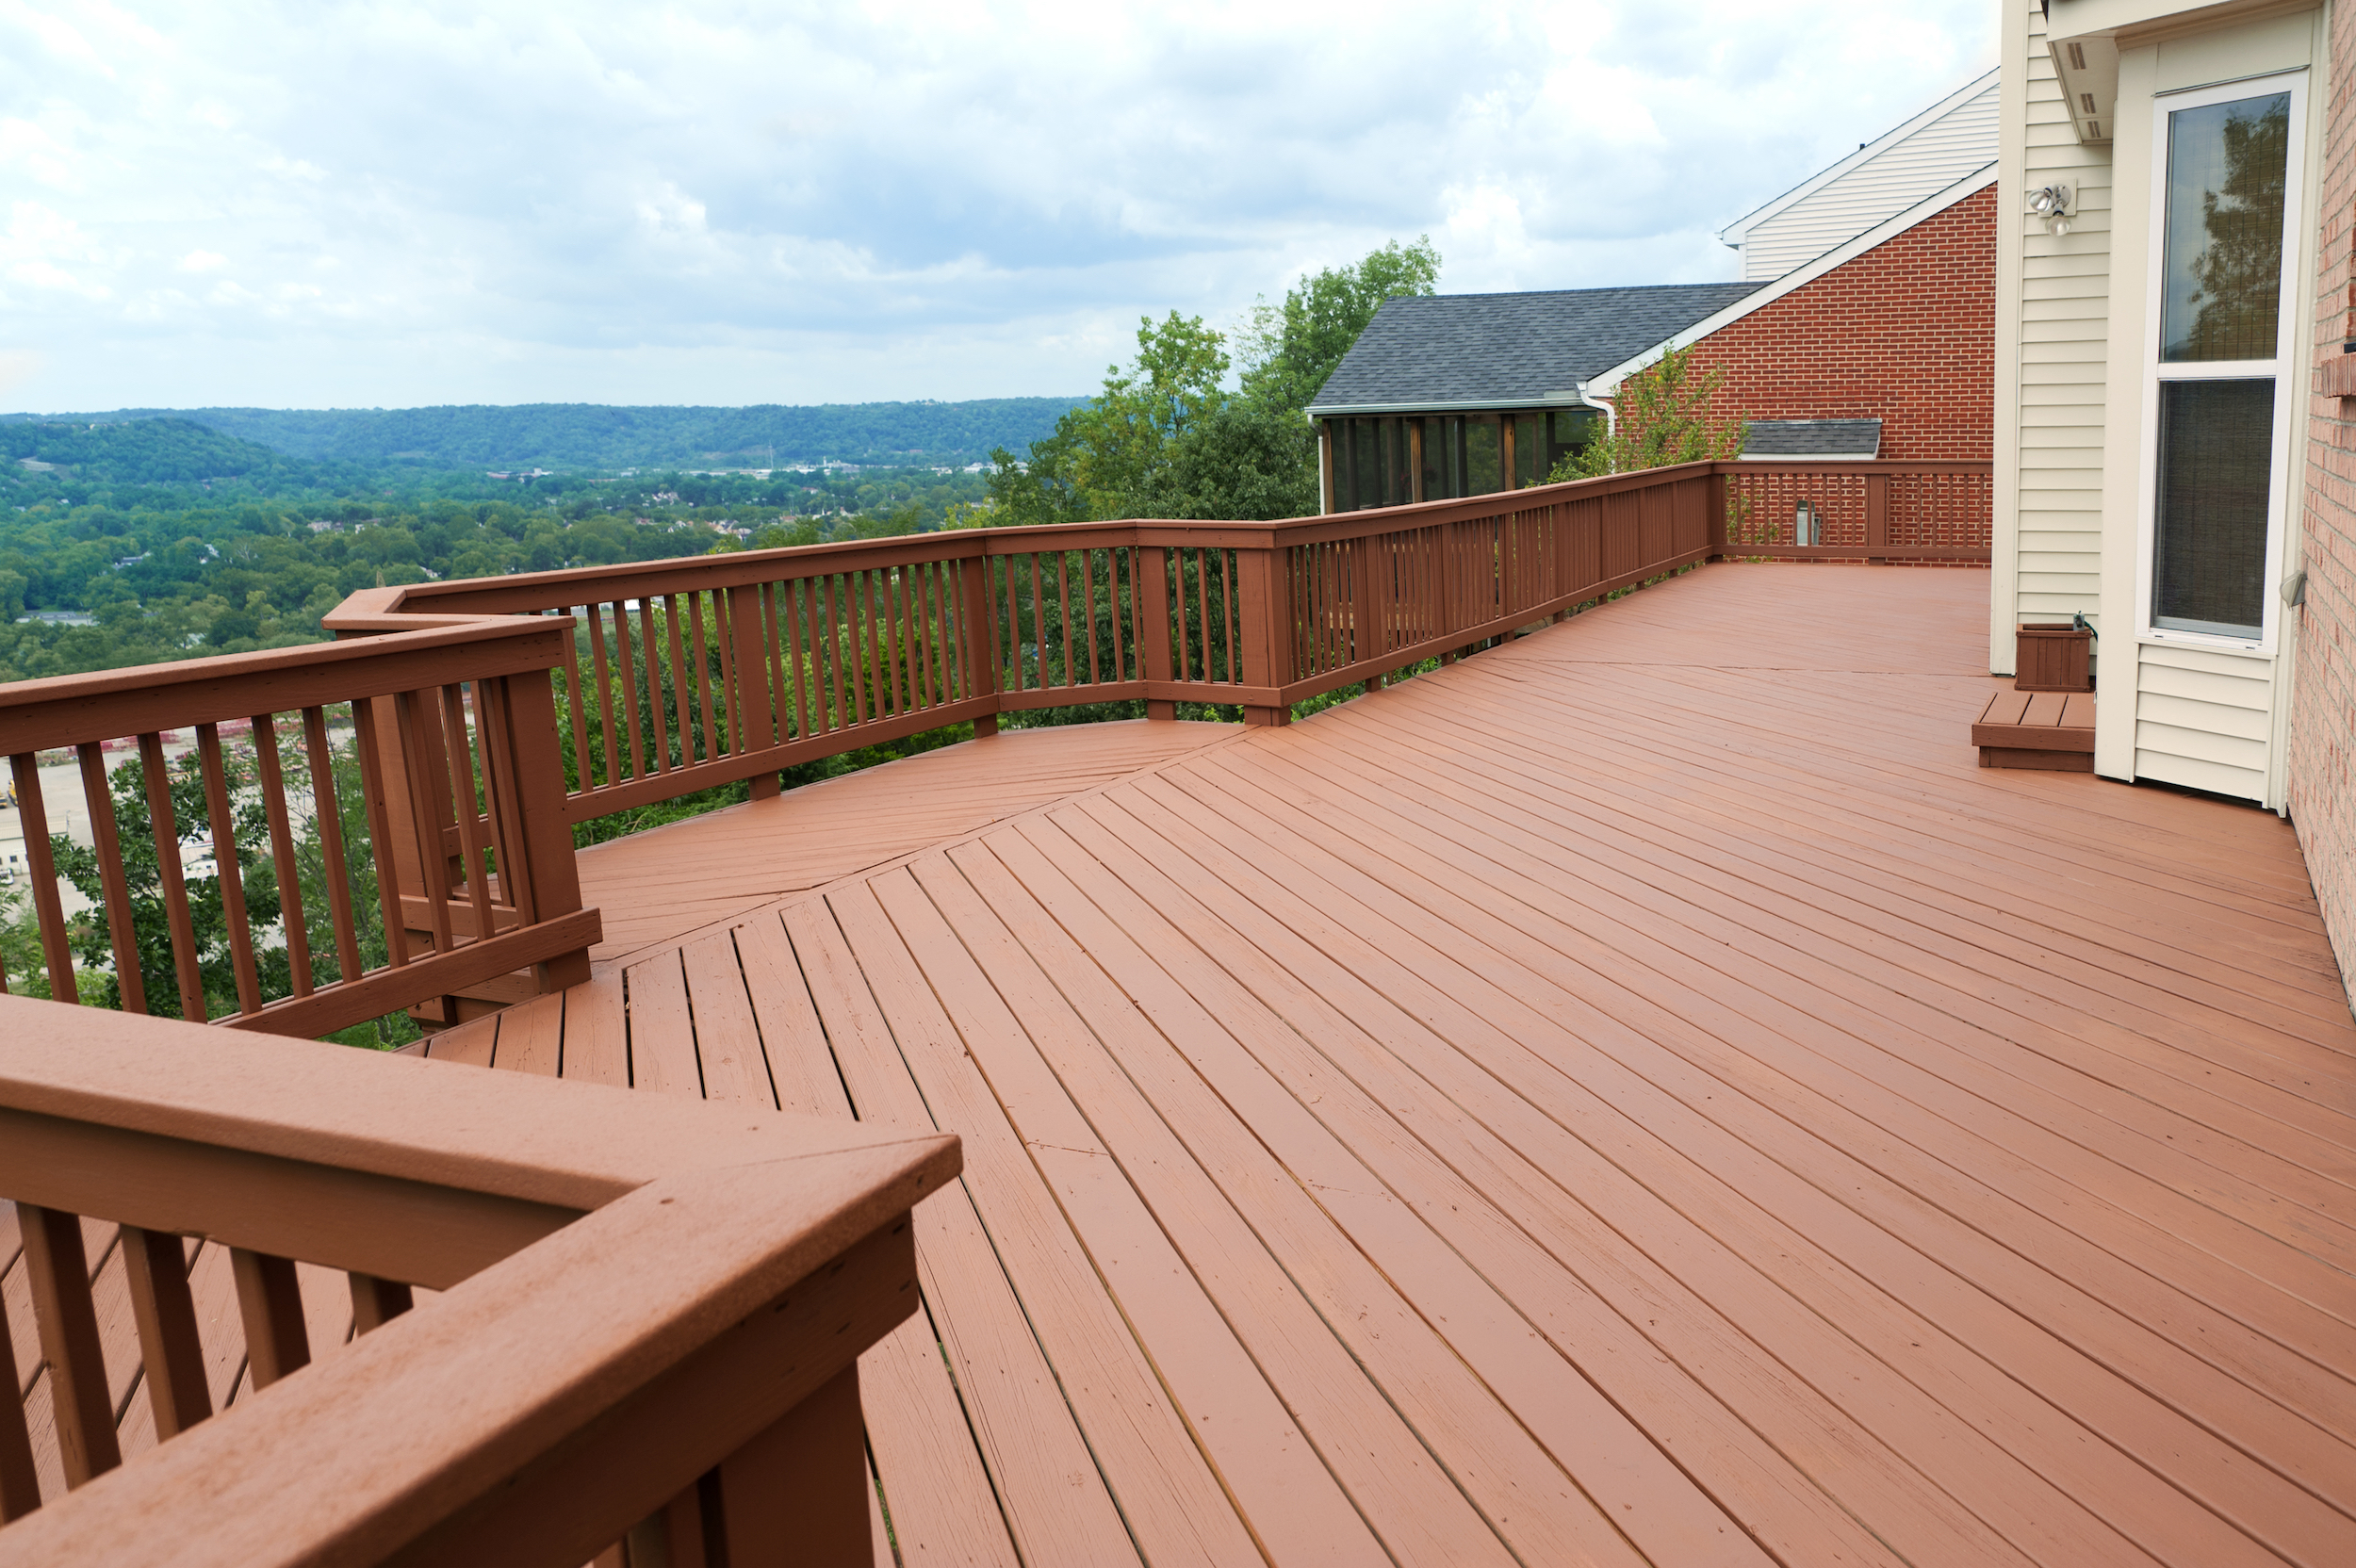 A,Freshly,Painted,And,Stained,Wood,Deck,With,Railing,On